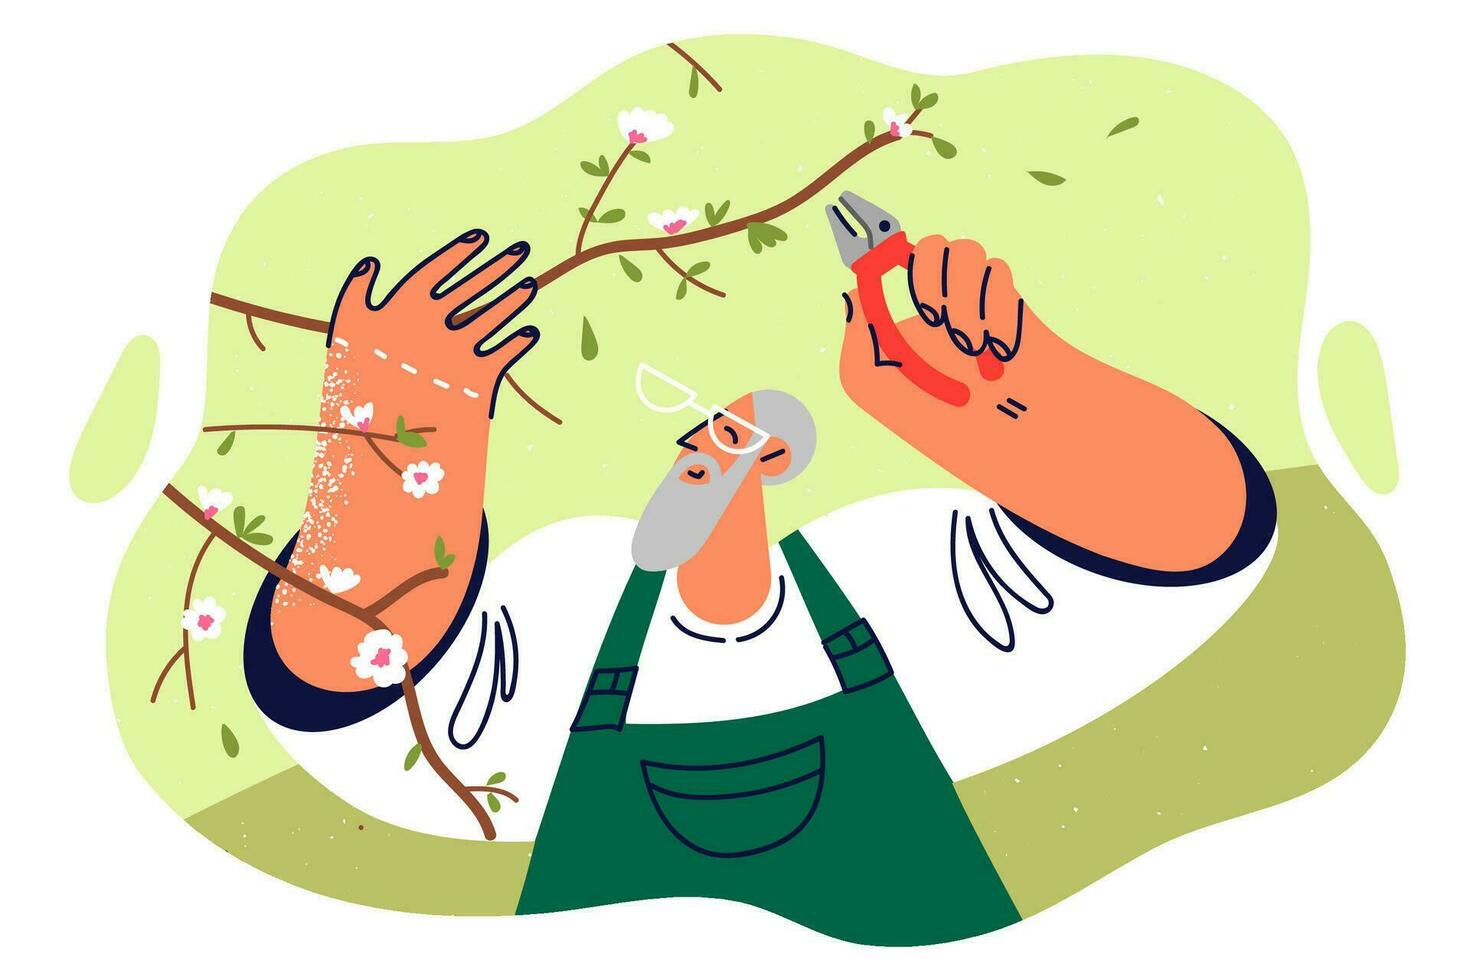 Elderly man gardener uses scissors trimming branches of flowering tree and caring for plants in park. Gray-haired old gardener enjoys work or hobby helping trees get rid of dry branches vector